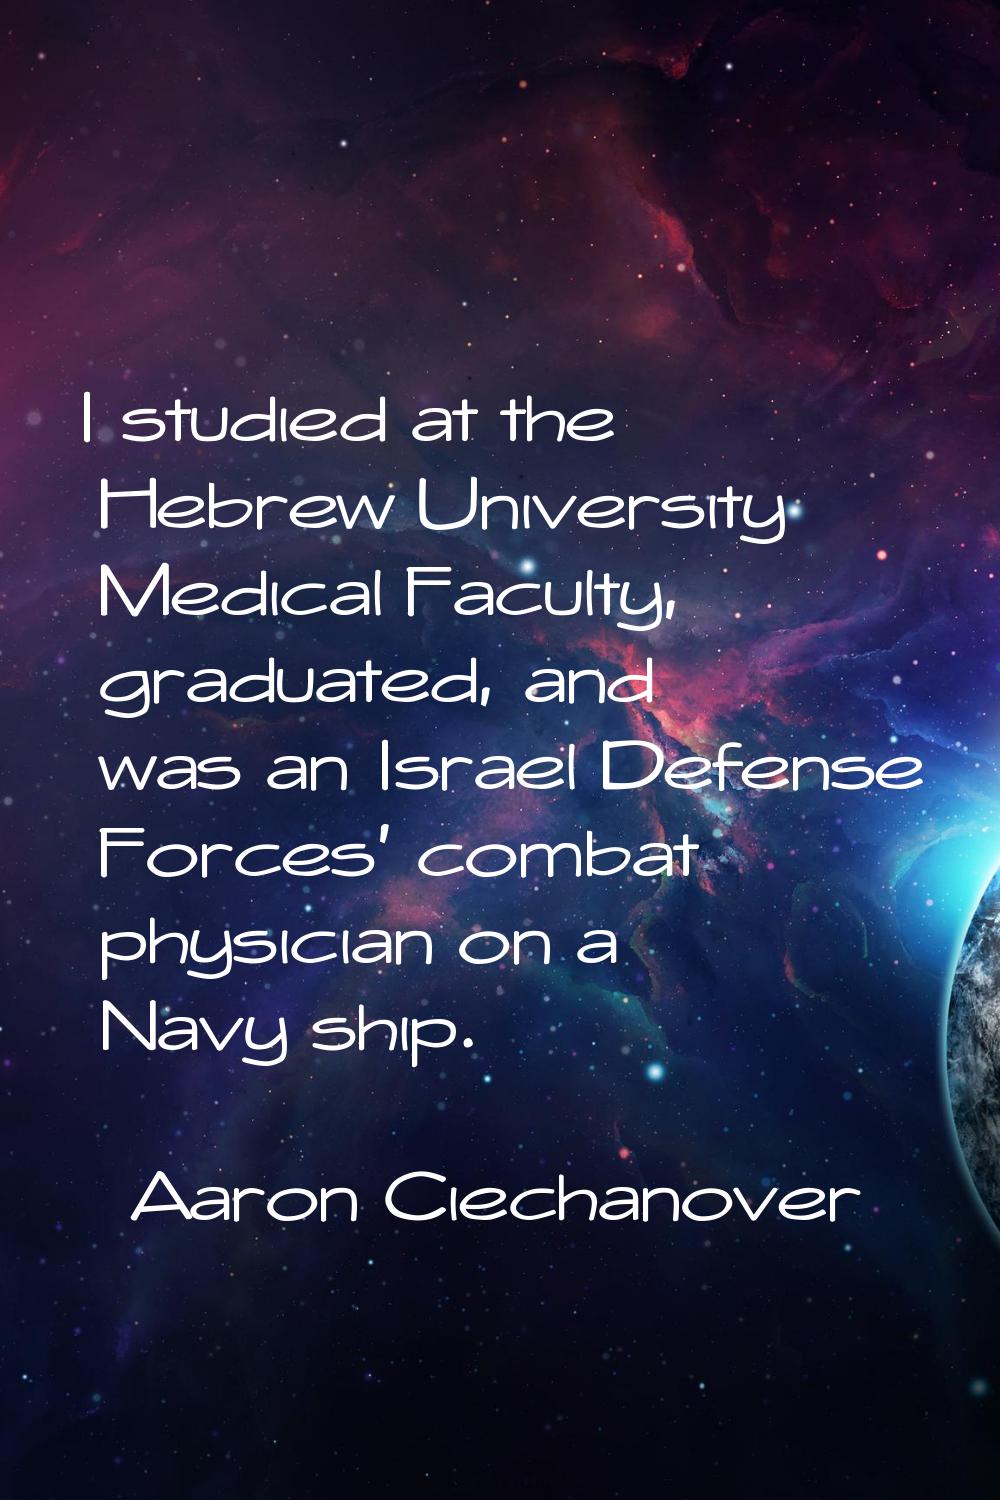 I studied at the Hebrew University Medical Faculty, graduated, and was an Israel Defense Forces' co